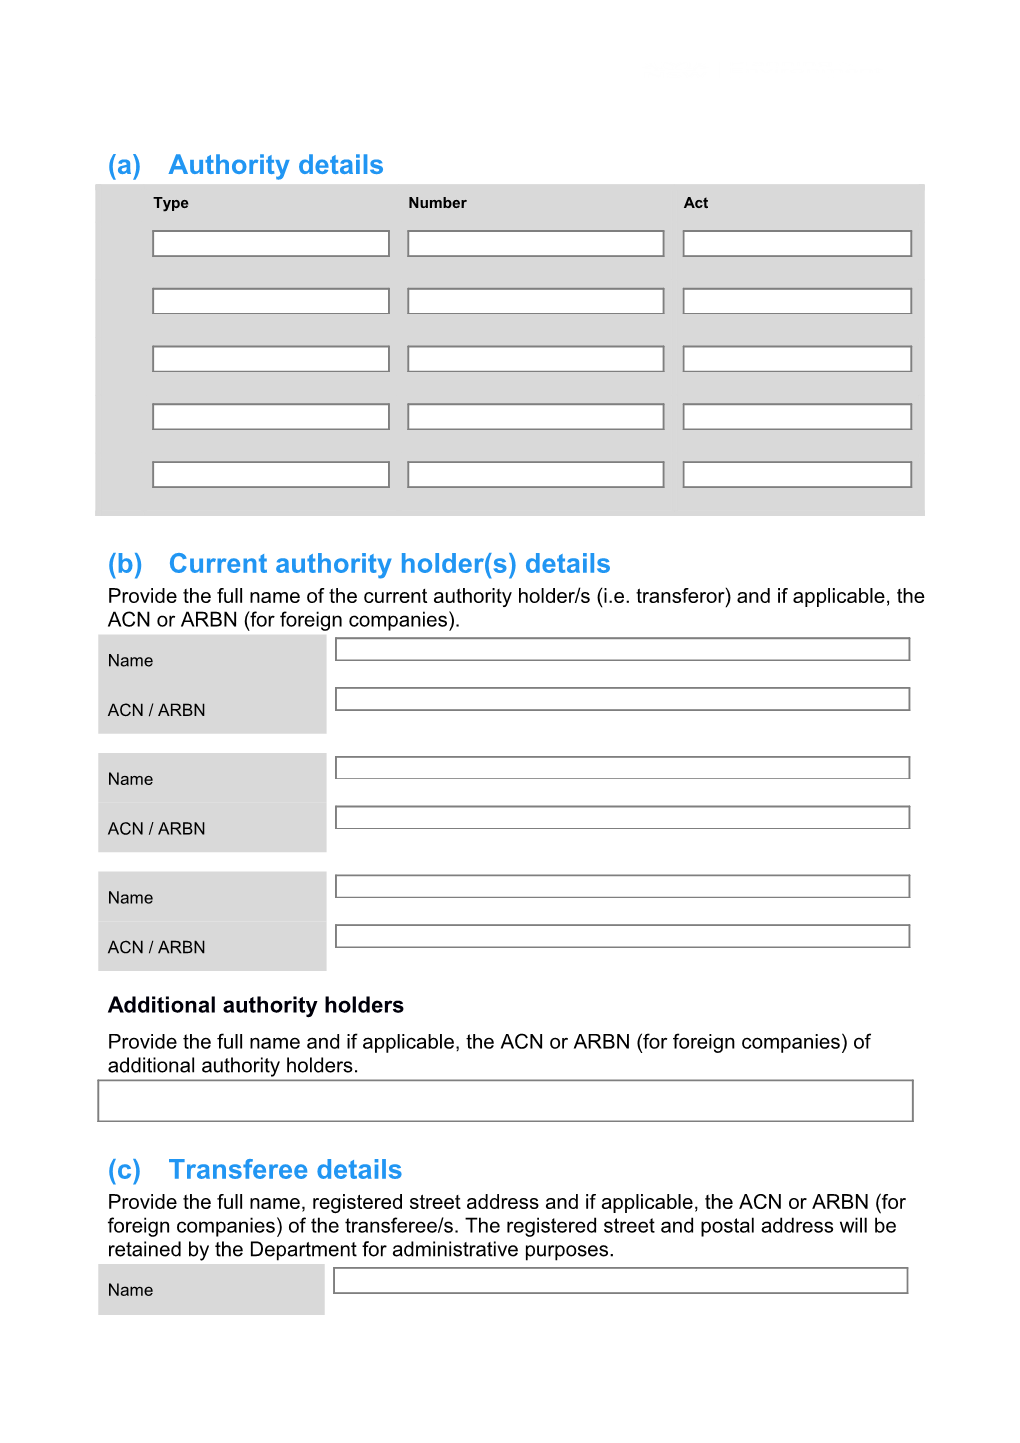 AD4 Application to Register a Transfer Or Partial Transfer of an Authority